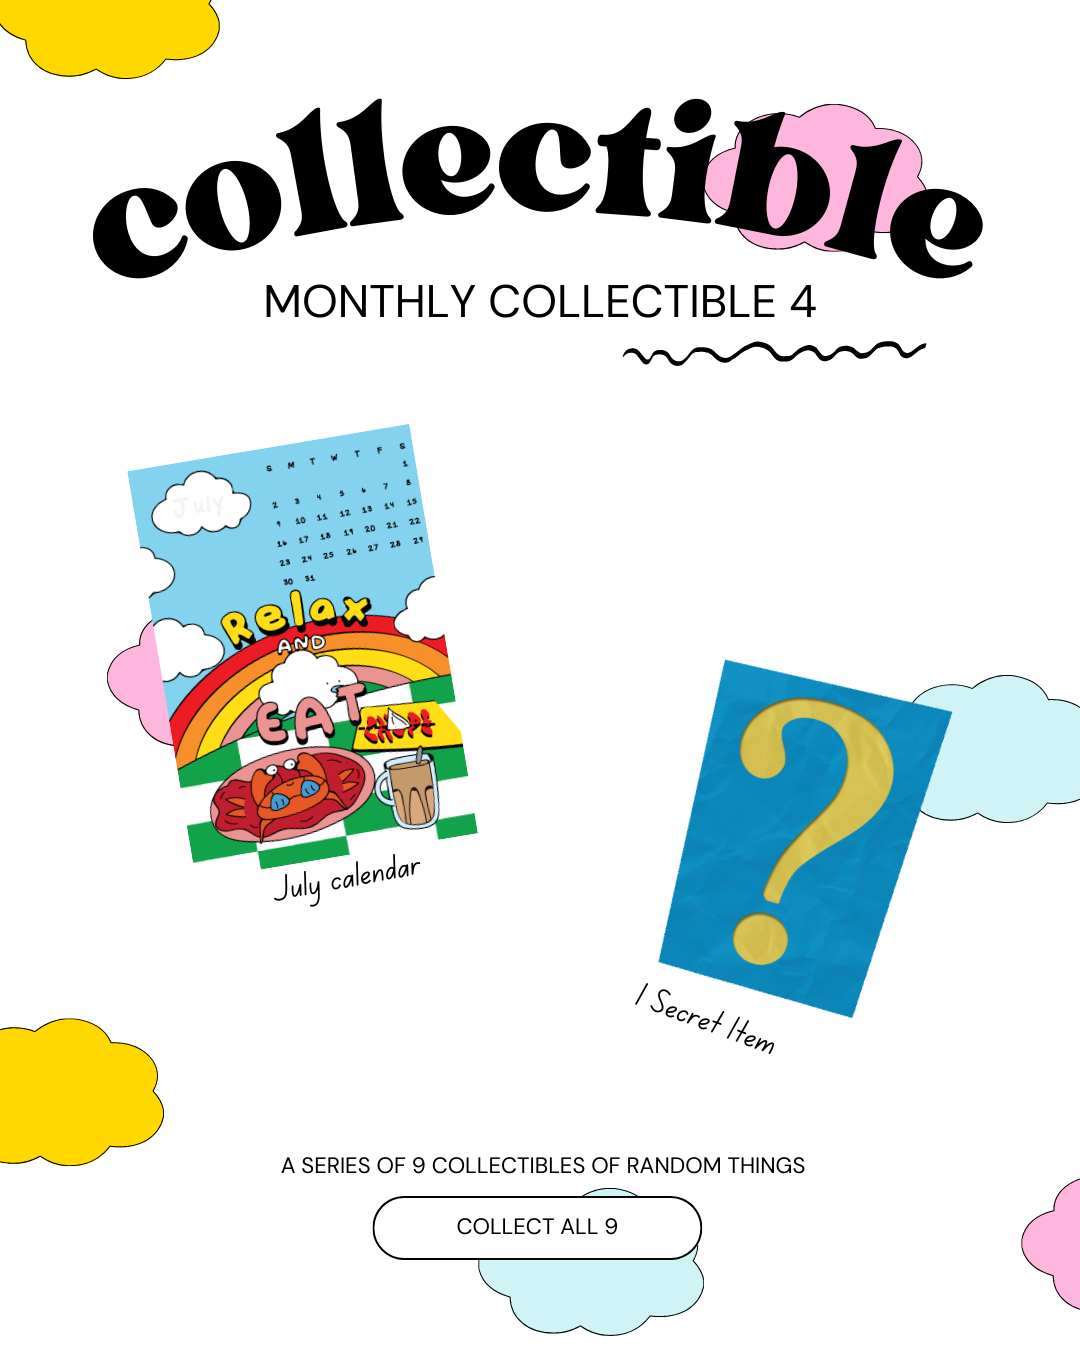 Monthly Collectible 4